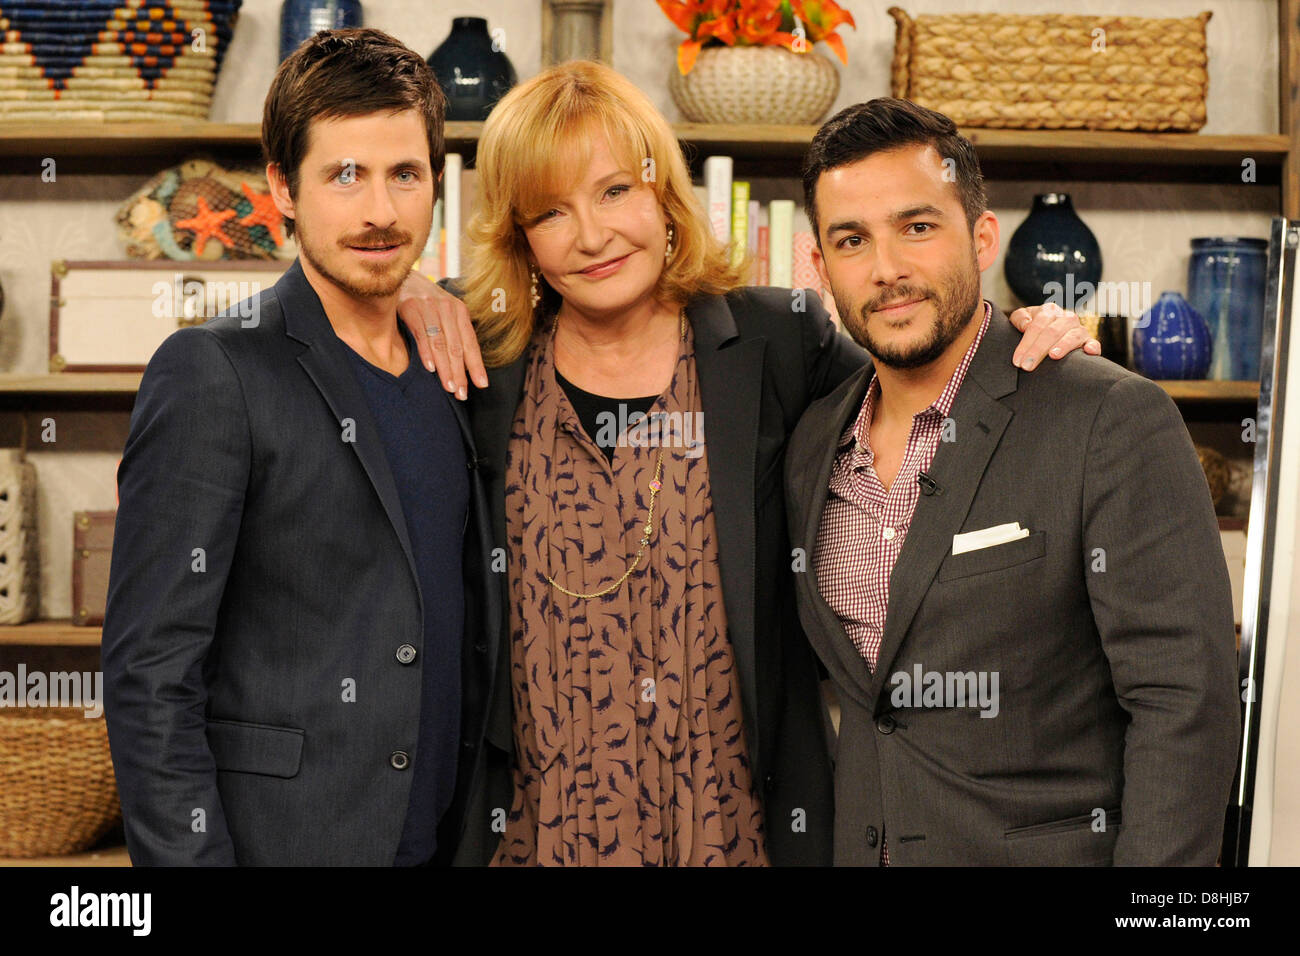 Toronto, Canada. 29th May 2013. Craig Olejnik and Ennis Esmer of THE LISTENER appears on CTV's talkshow The Marilyn Denis Show to promote the series. (EXI/N8N/Alamy Live News) Stock Photo